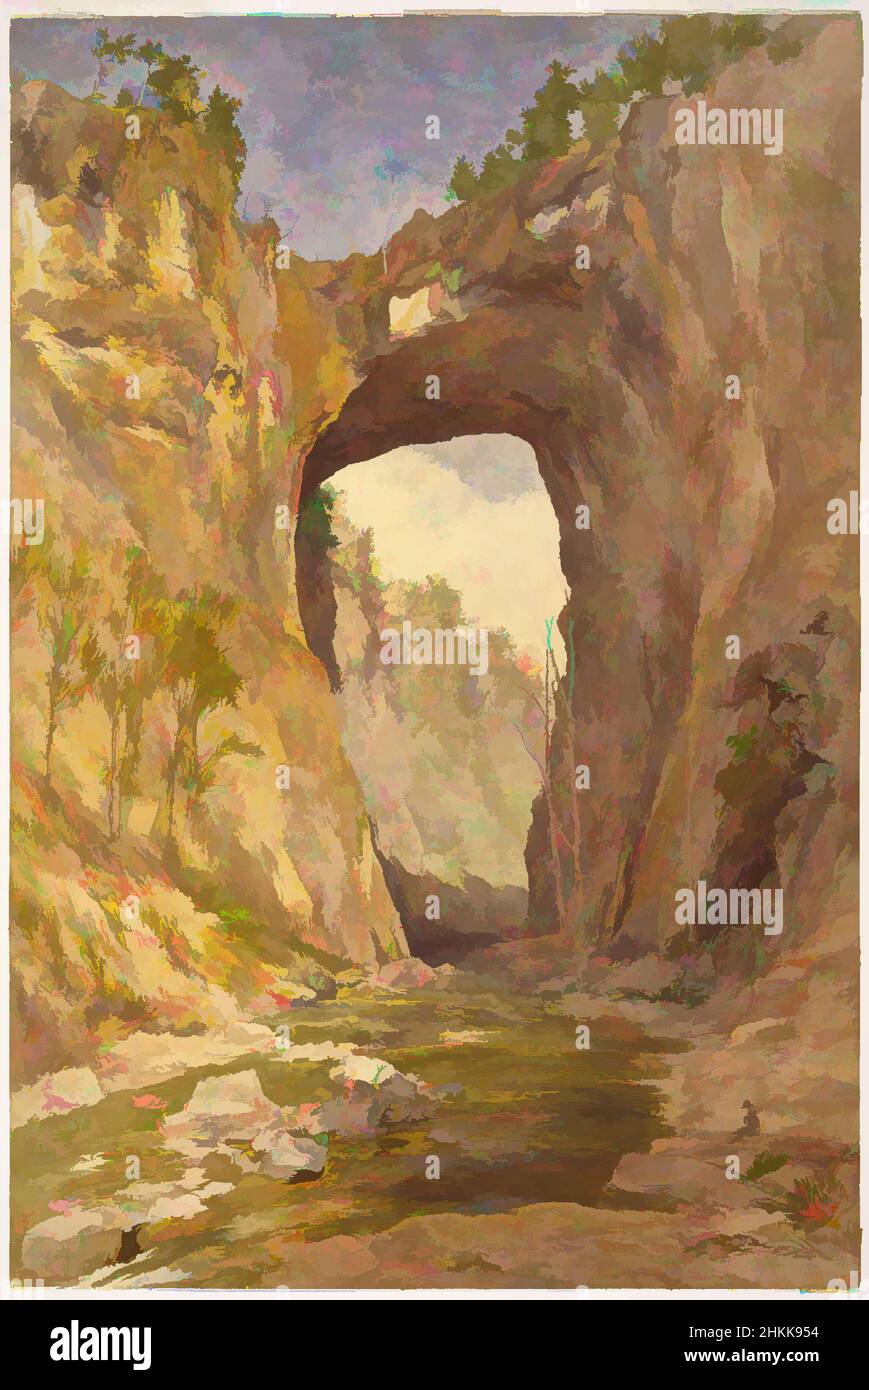 Art inspired by Natural Bridge, Virginia, John Henry Hill, American, 1839-1922, Watercolor over graphite on very thick, slightly textured wove paper mounted to a secondary paper, 1876, 21 1/4 x 14 1/8 in., 54 x 35.9 cm, 19th Century, American, Bridge, brush, canyon, carved, formation, Classic works modernized by Artotop with a splash of modernity. Shapes, color and value, eye-catching visual impact on art. Emotions through freedom of artworks in a contemporary way. A timeless message pursuing a wildly creative new direction. Artists turning to the digital medium and creating the Artotop NFT Stock Photo